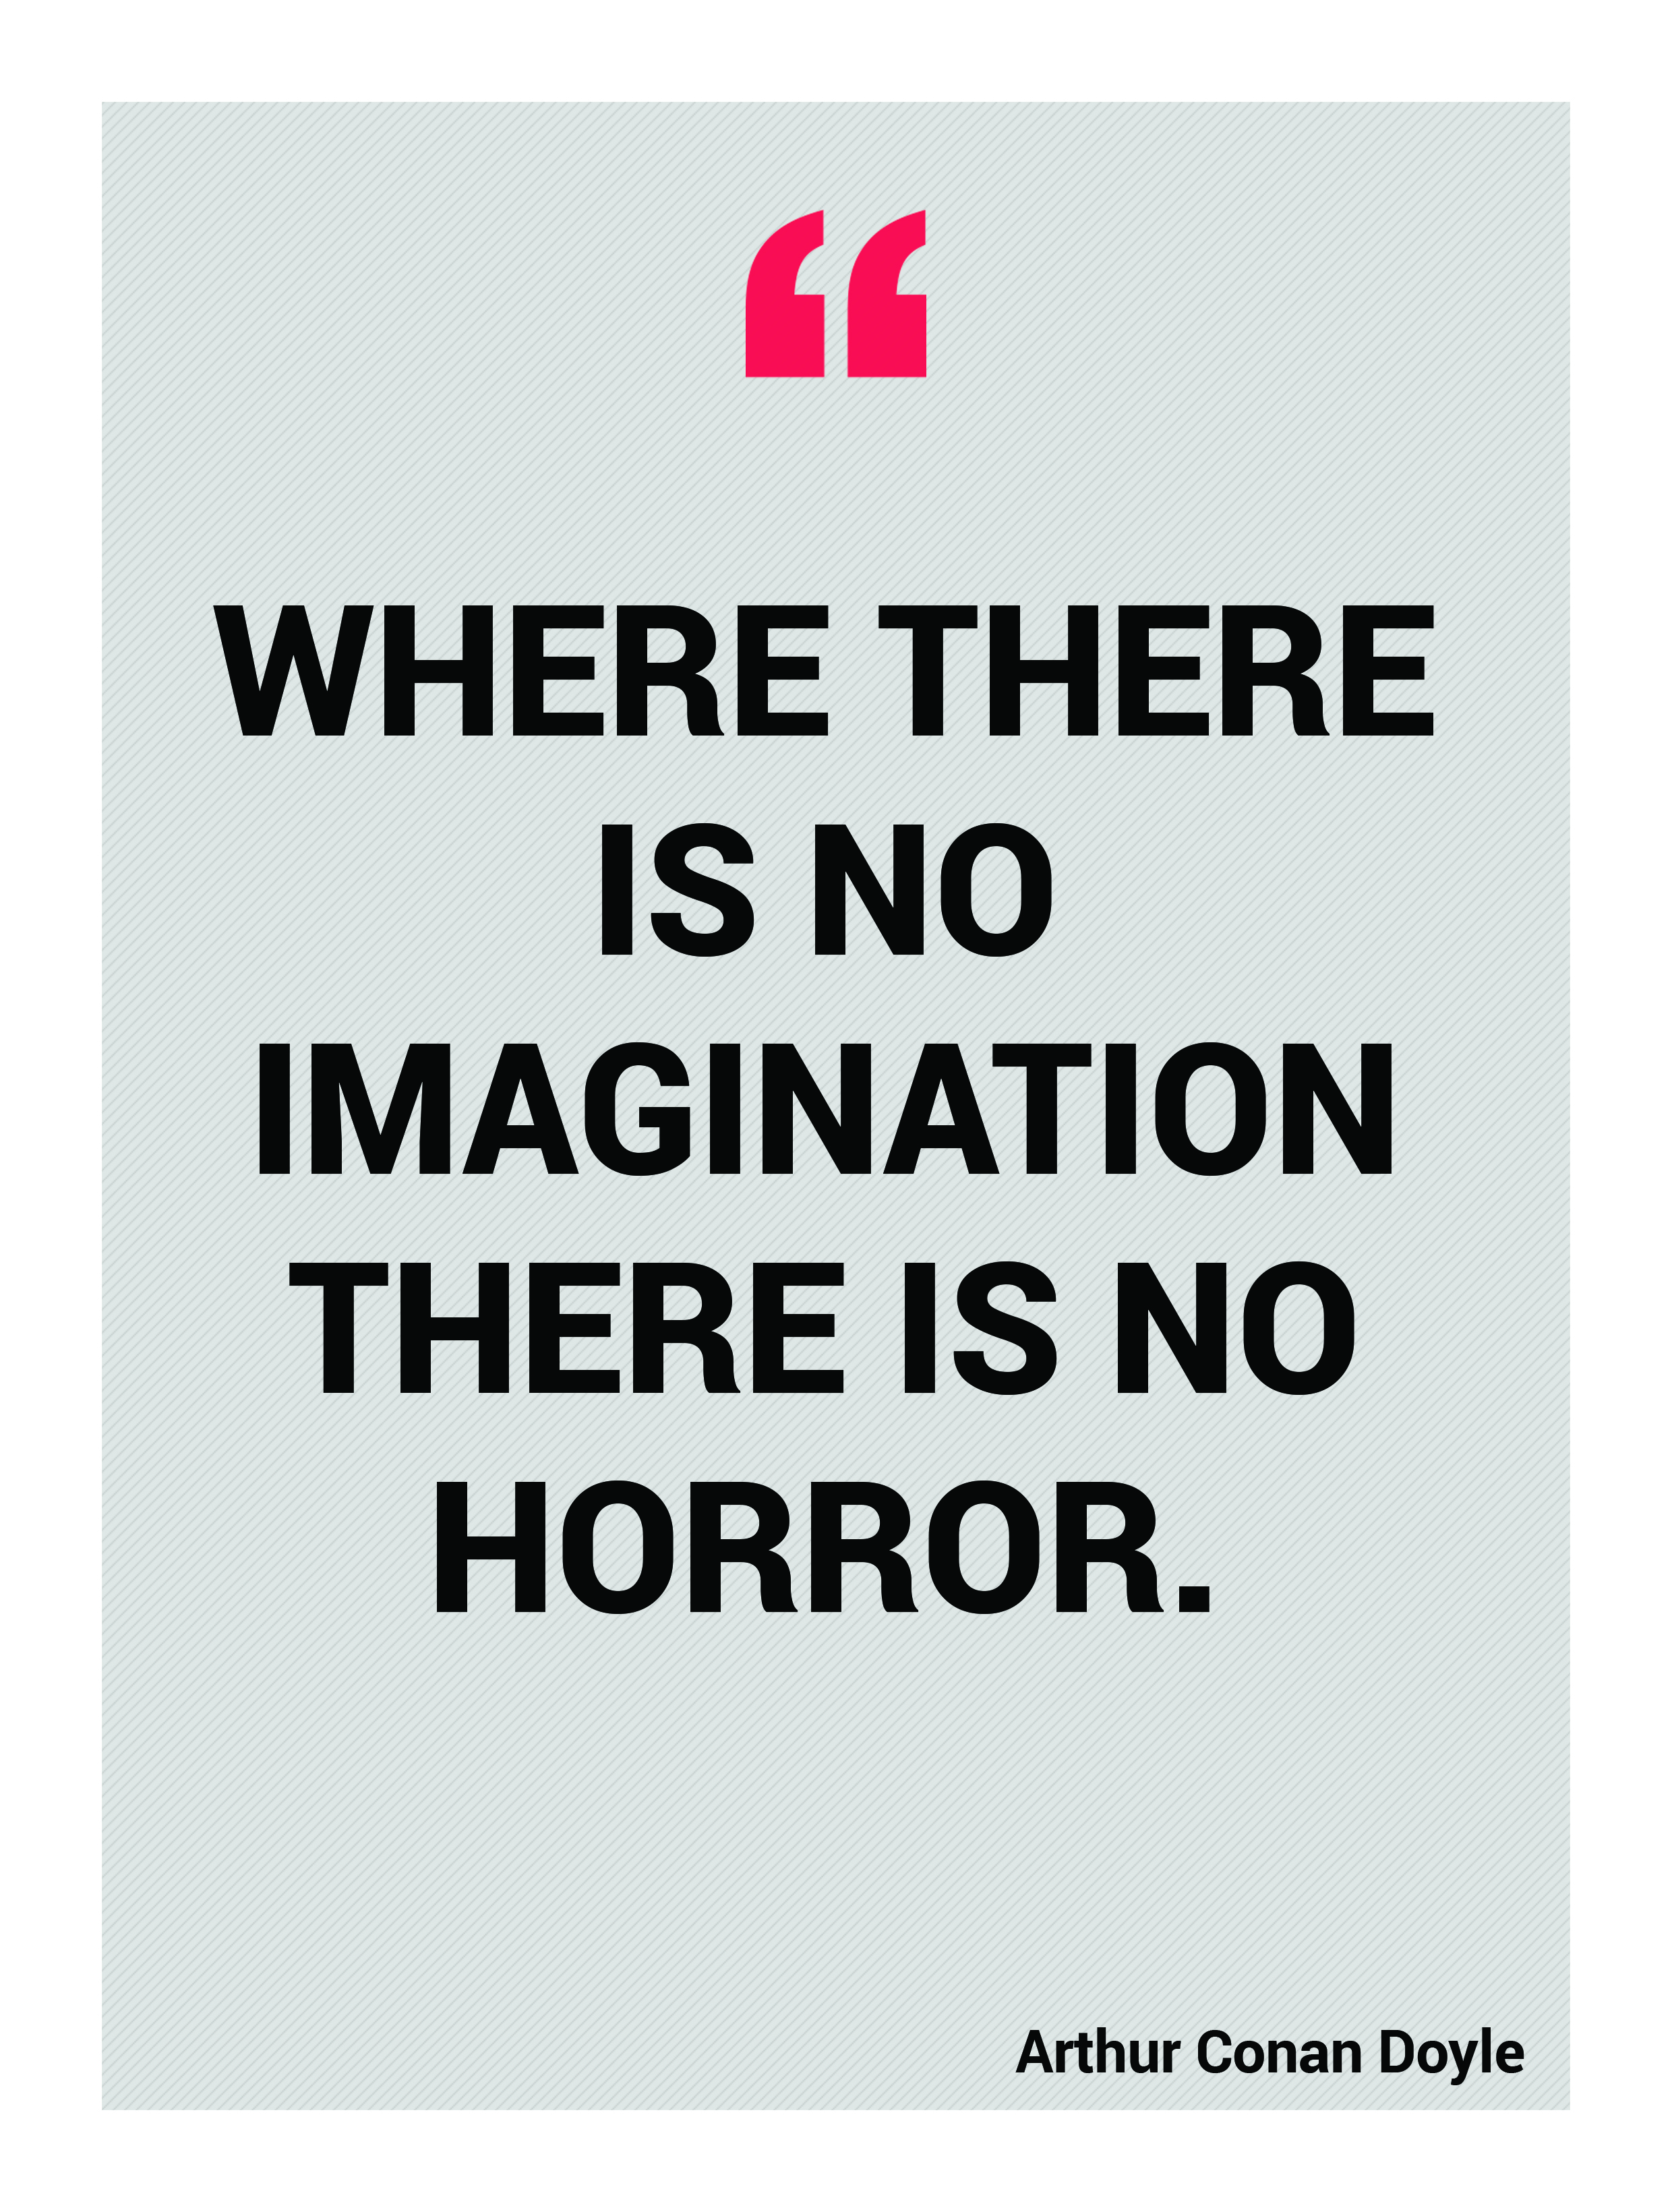 Where there is no imagination there is no horror. Arthur Conan Doyle